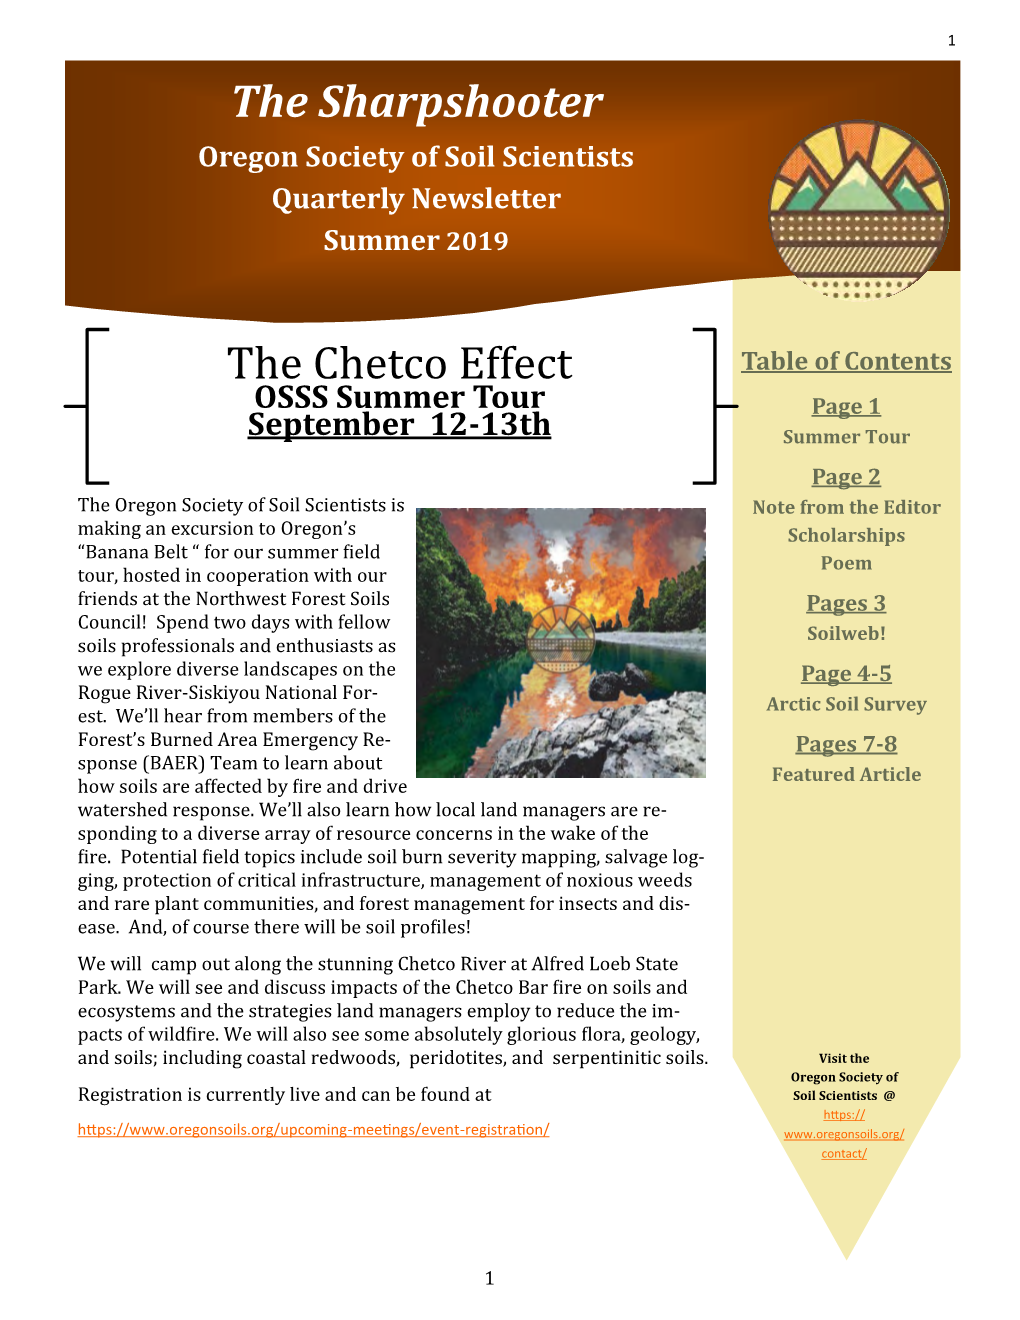 The Sharpshooter the Chetco Effect